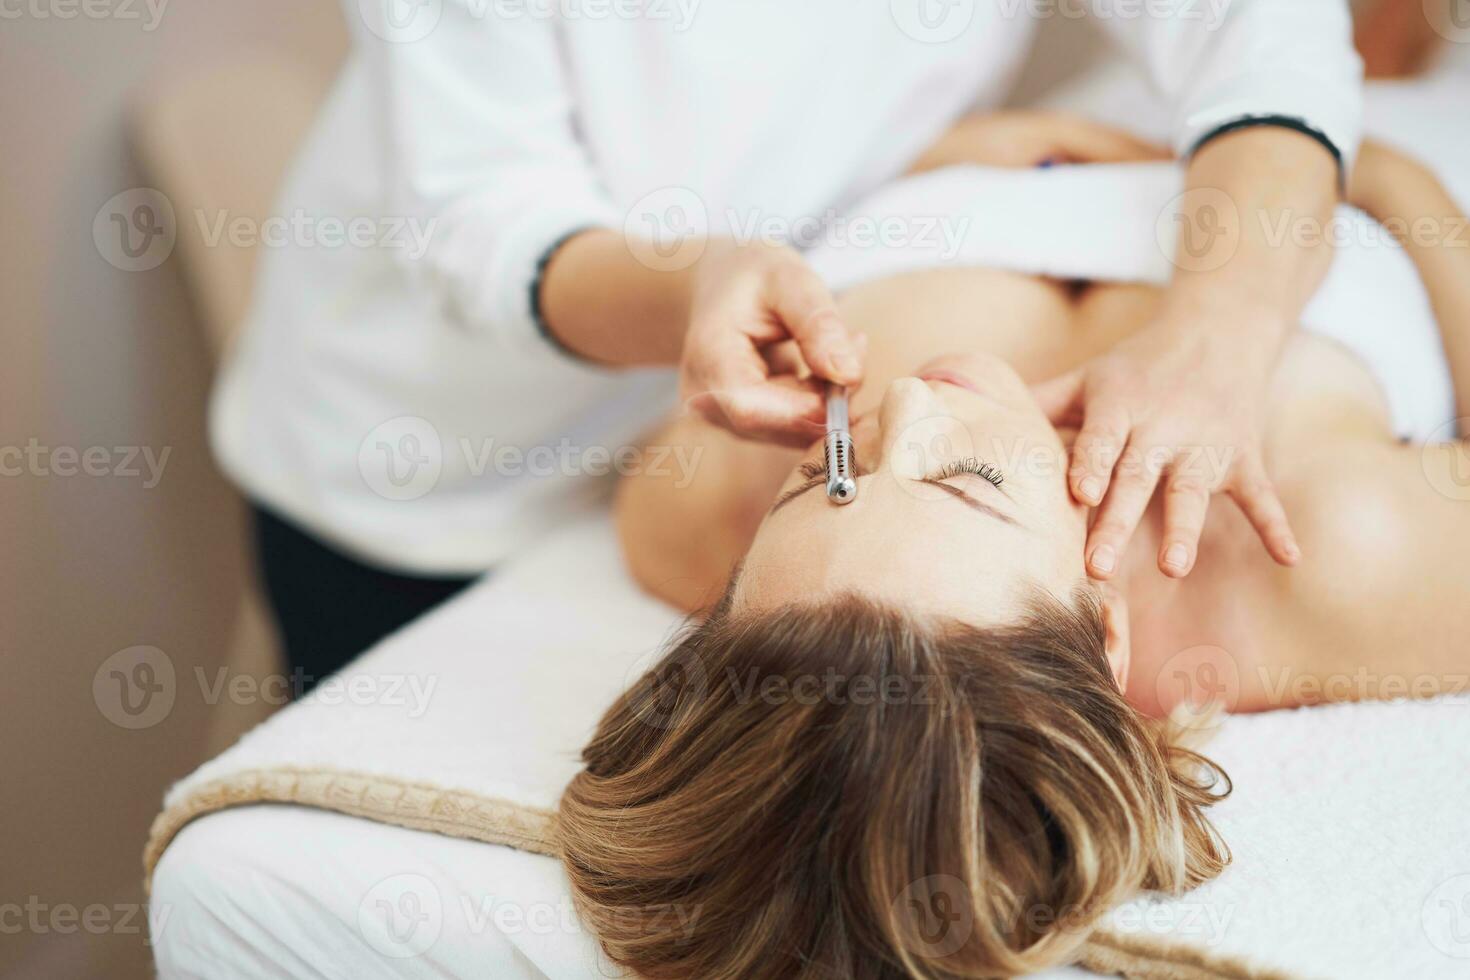 Picture of moxibustion roller treatment op woman face photo